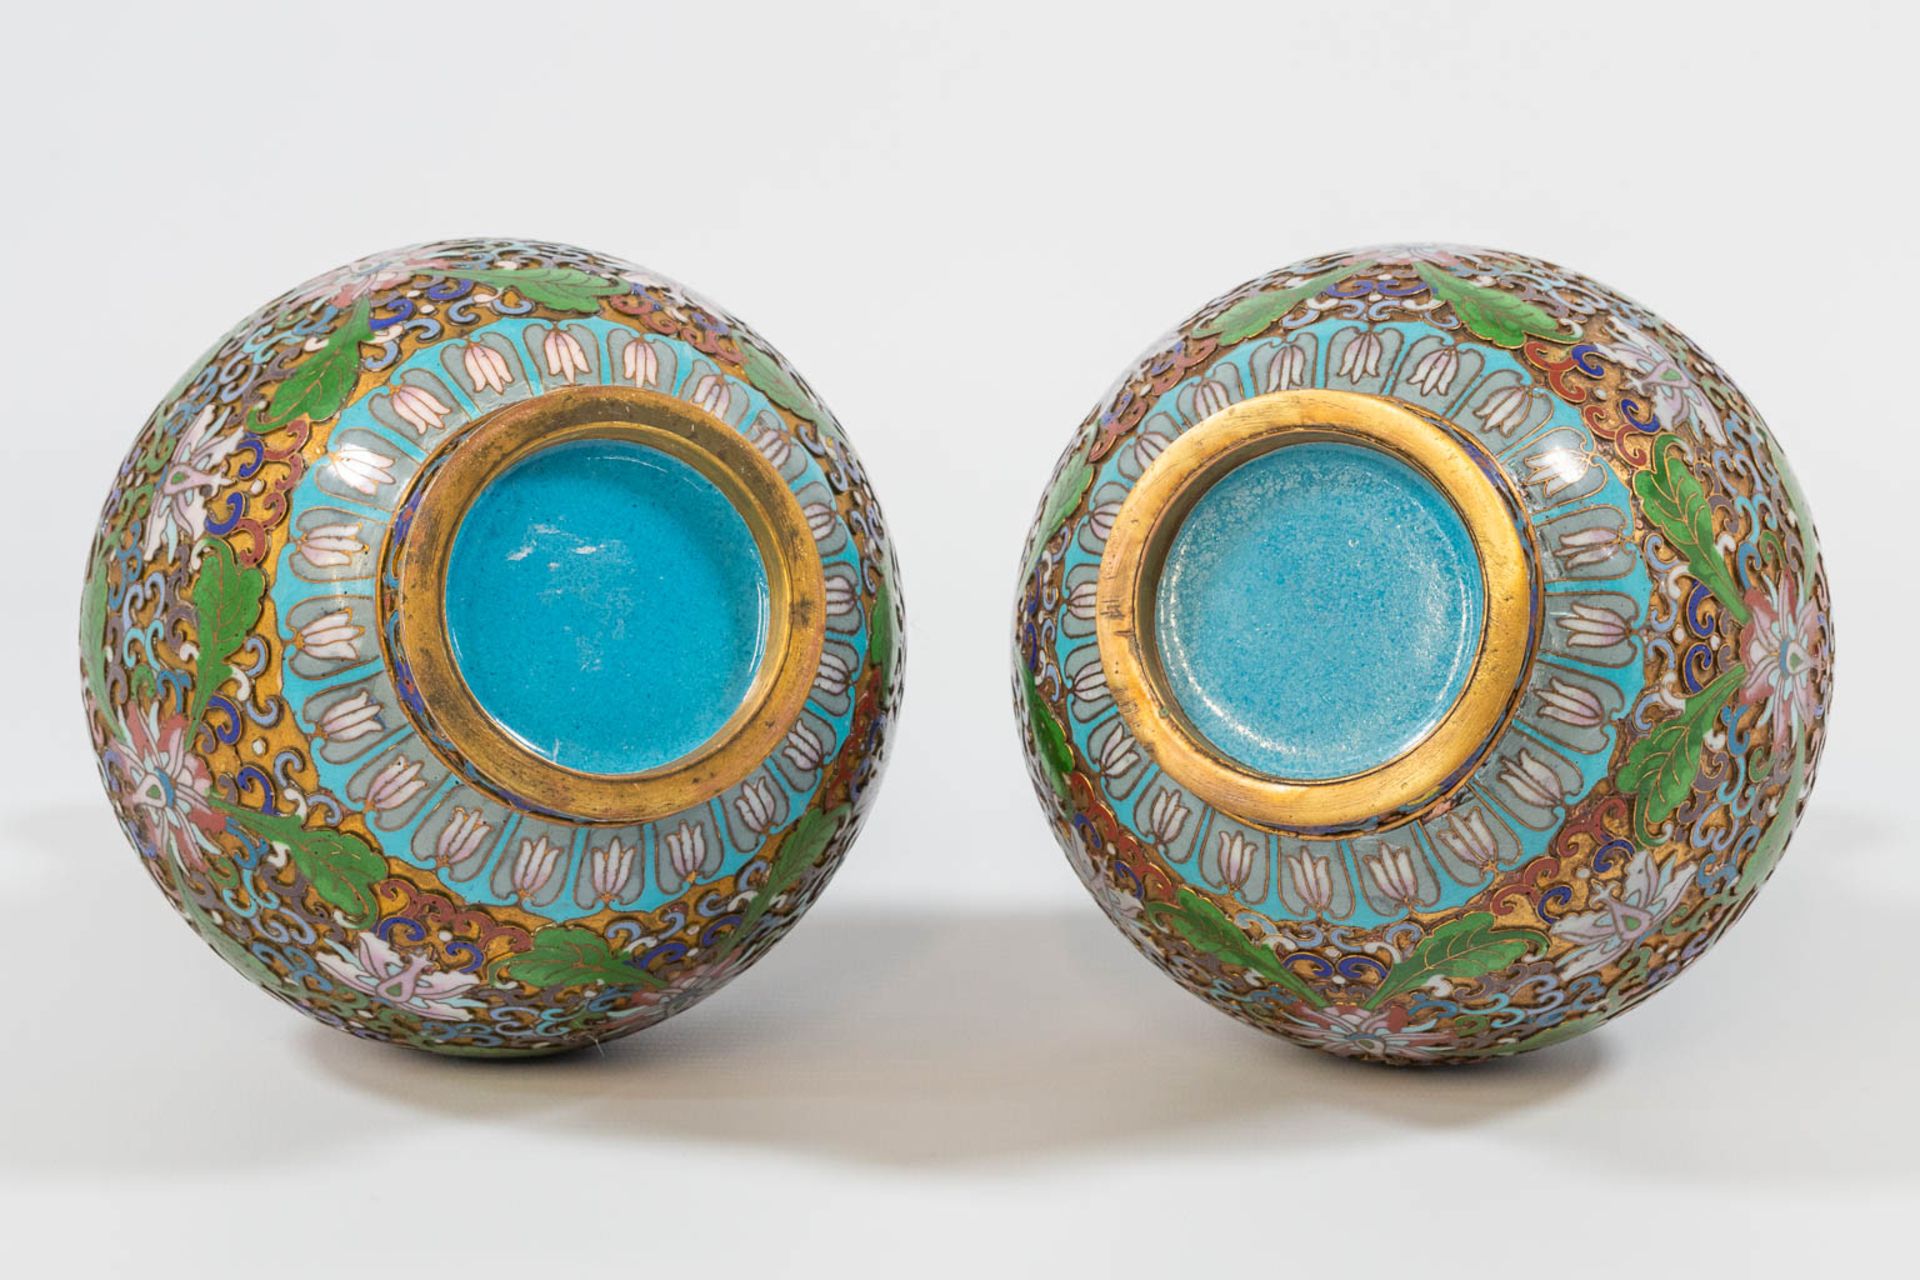 A pair of openworked Cloisonné vases, made of Bronze and enamel. - Image 9 of 17